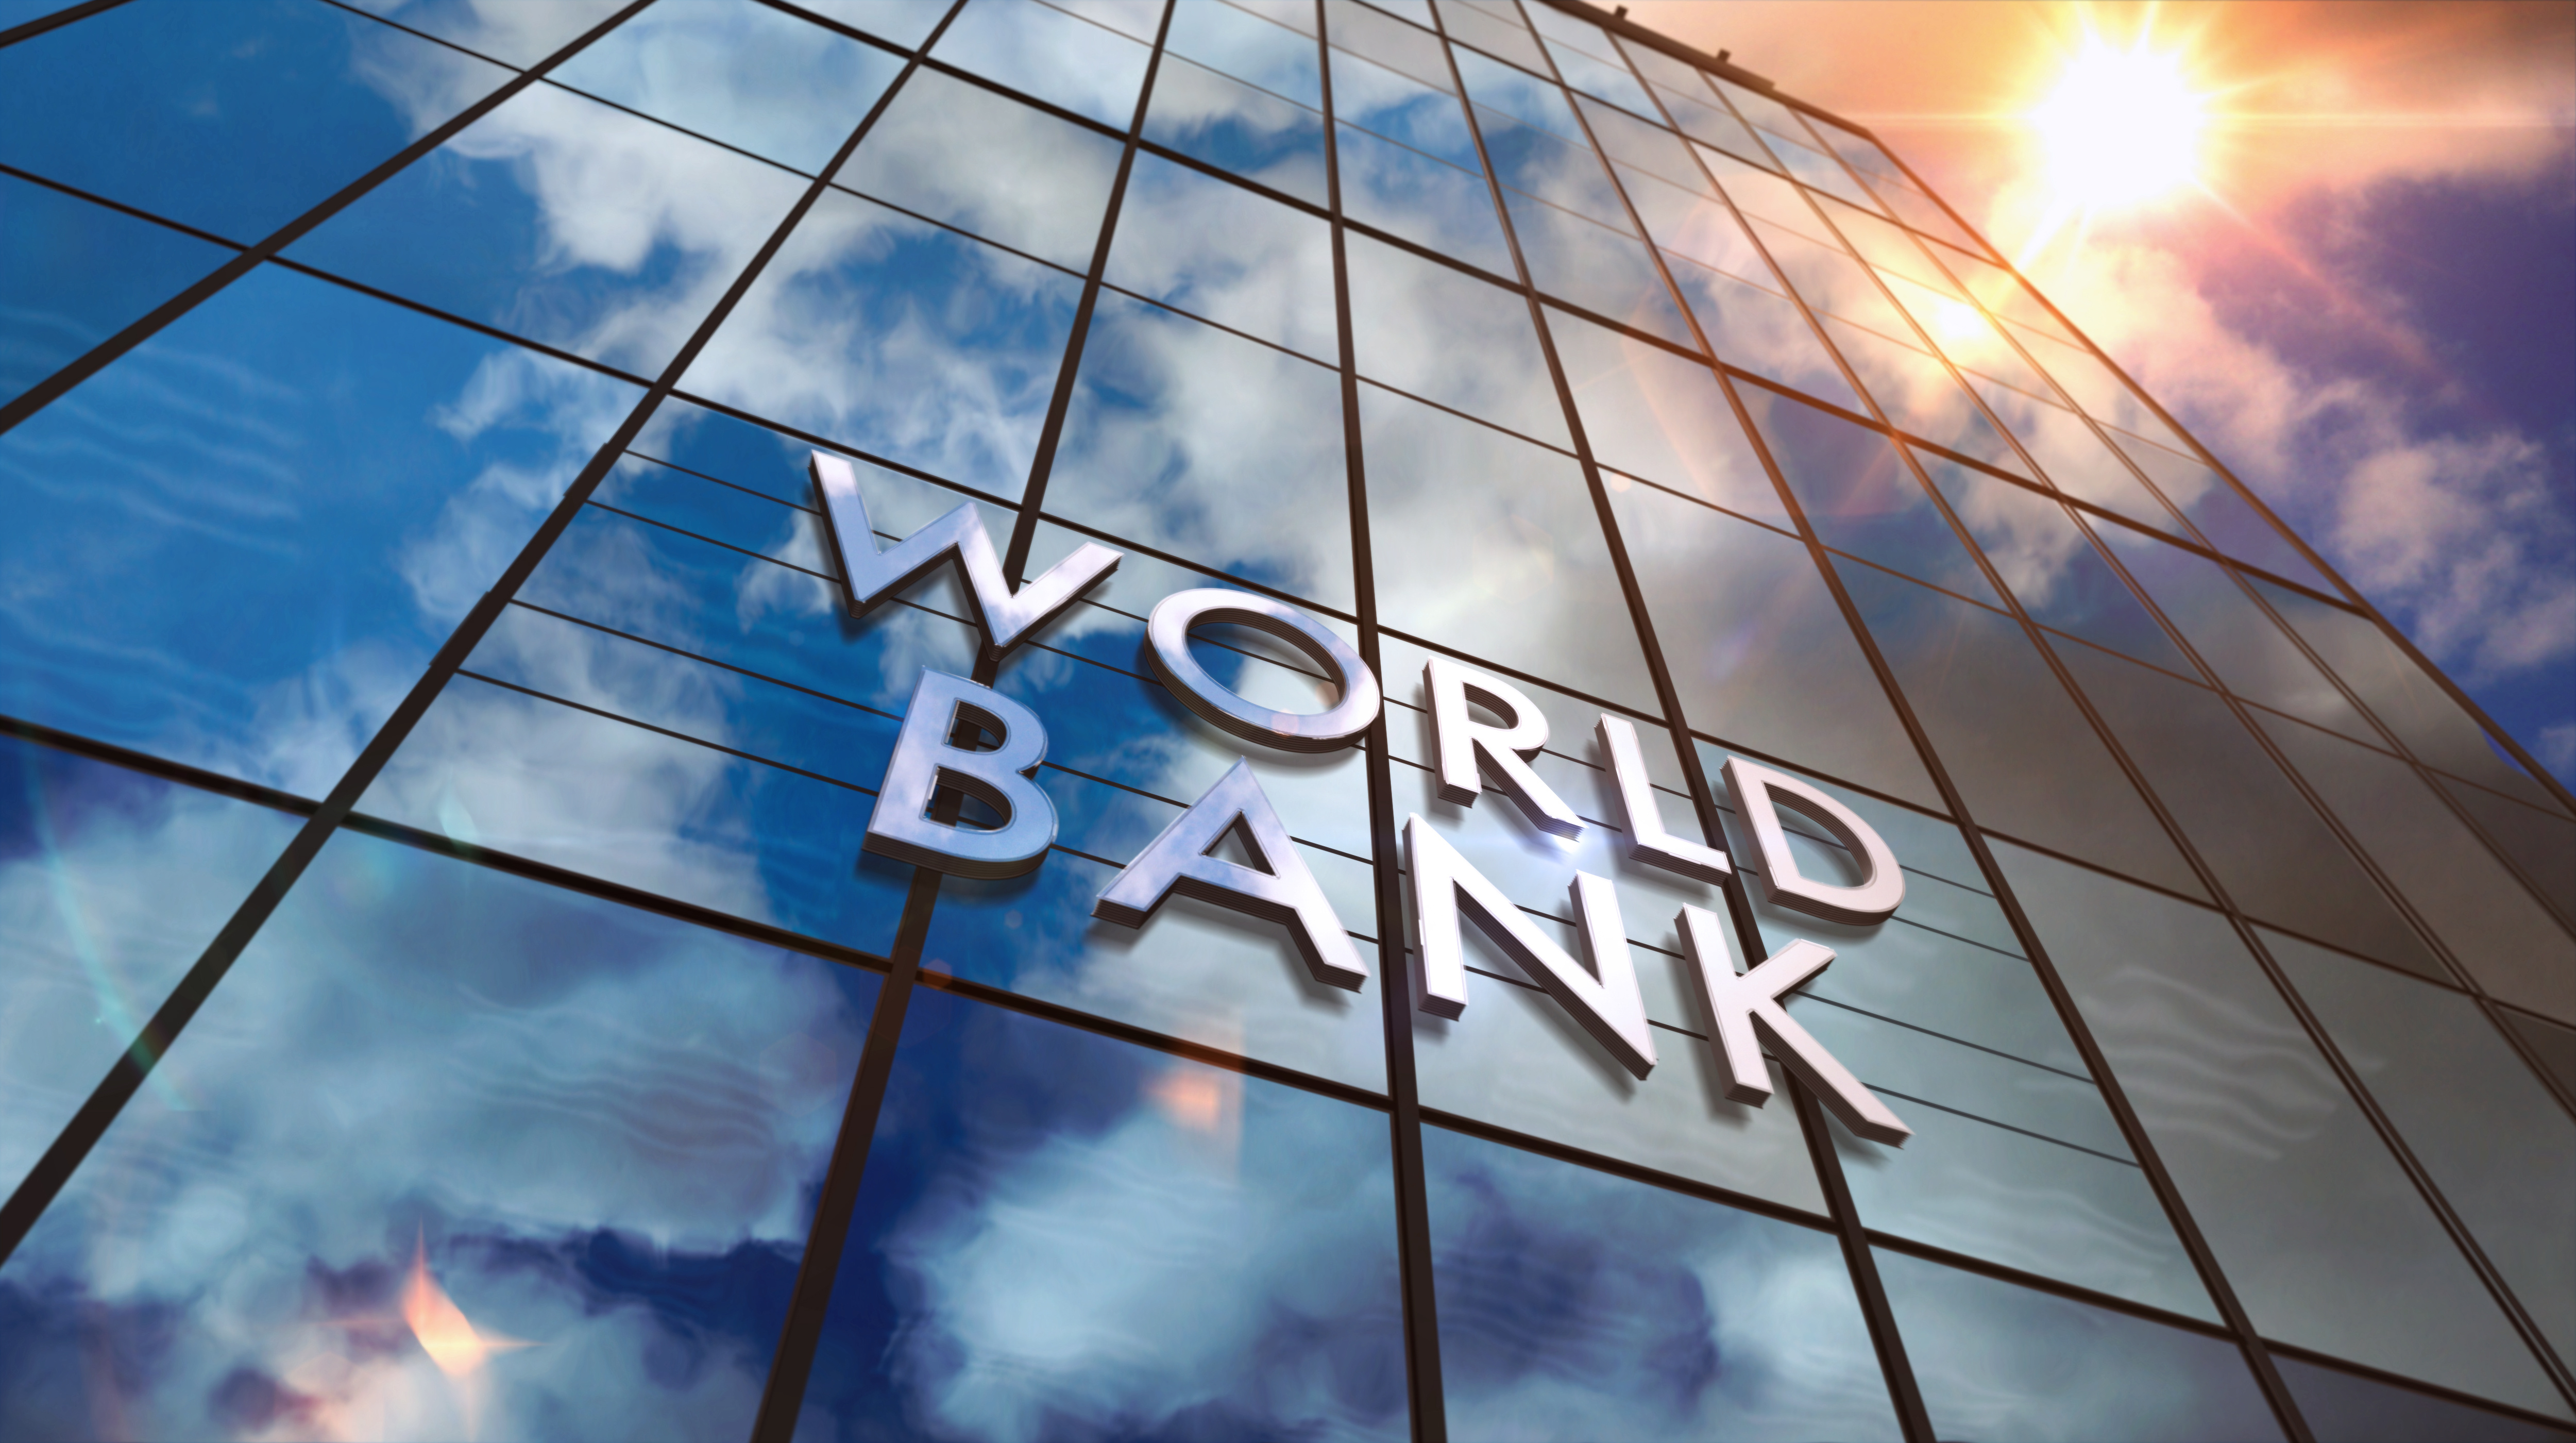 Every fifth business has suffered destruction. The World Bank assessed the losses of Ukrainian enterprises